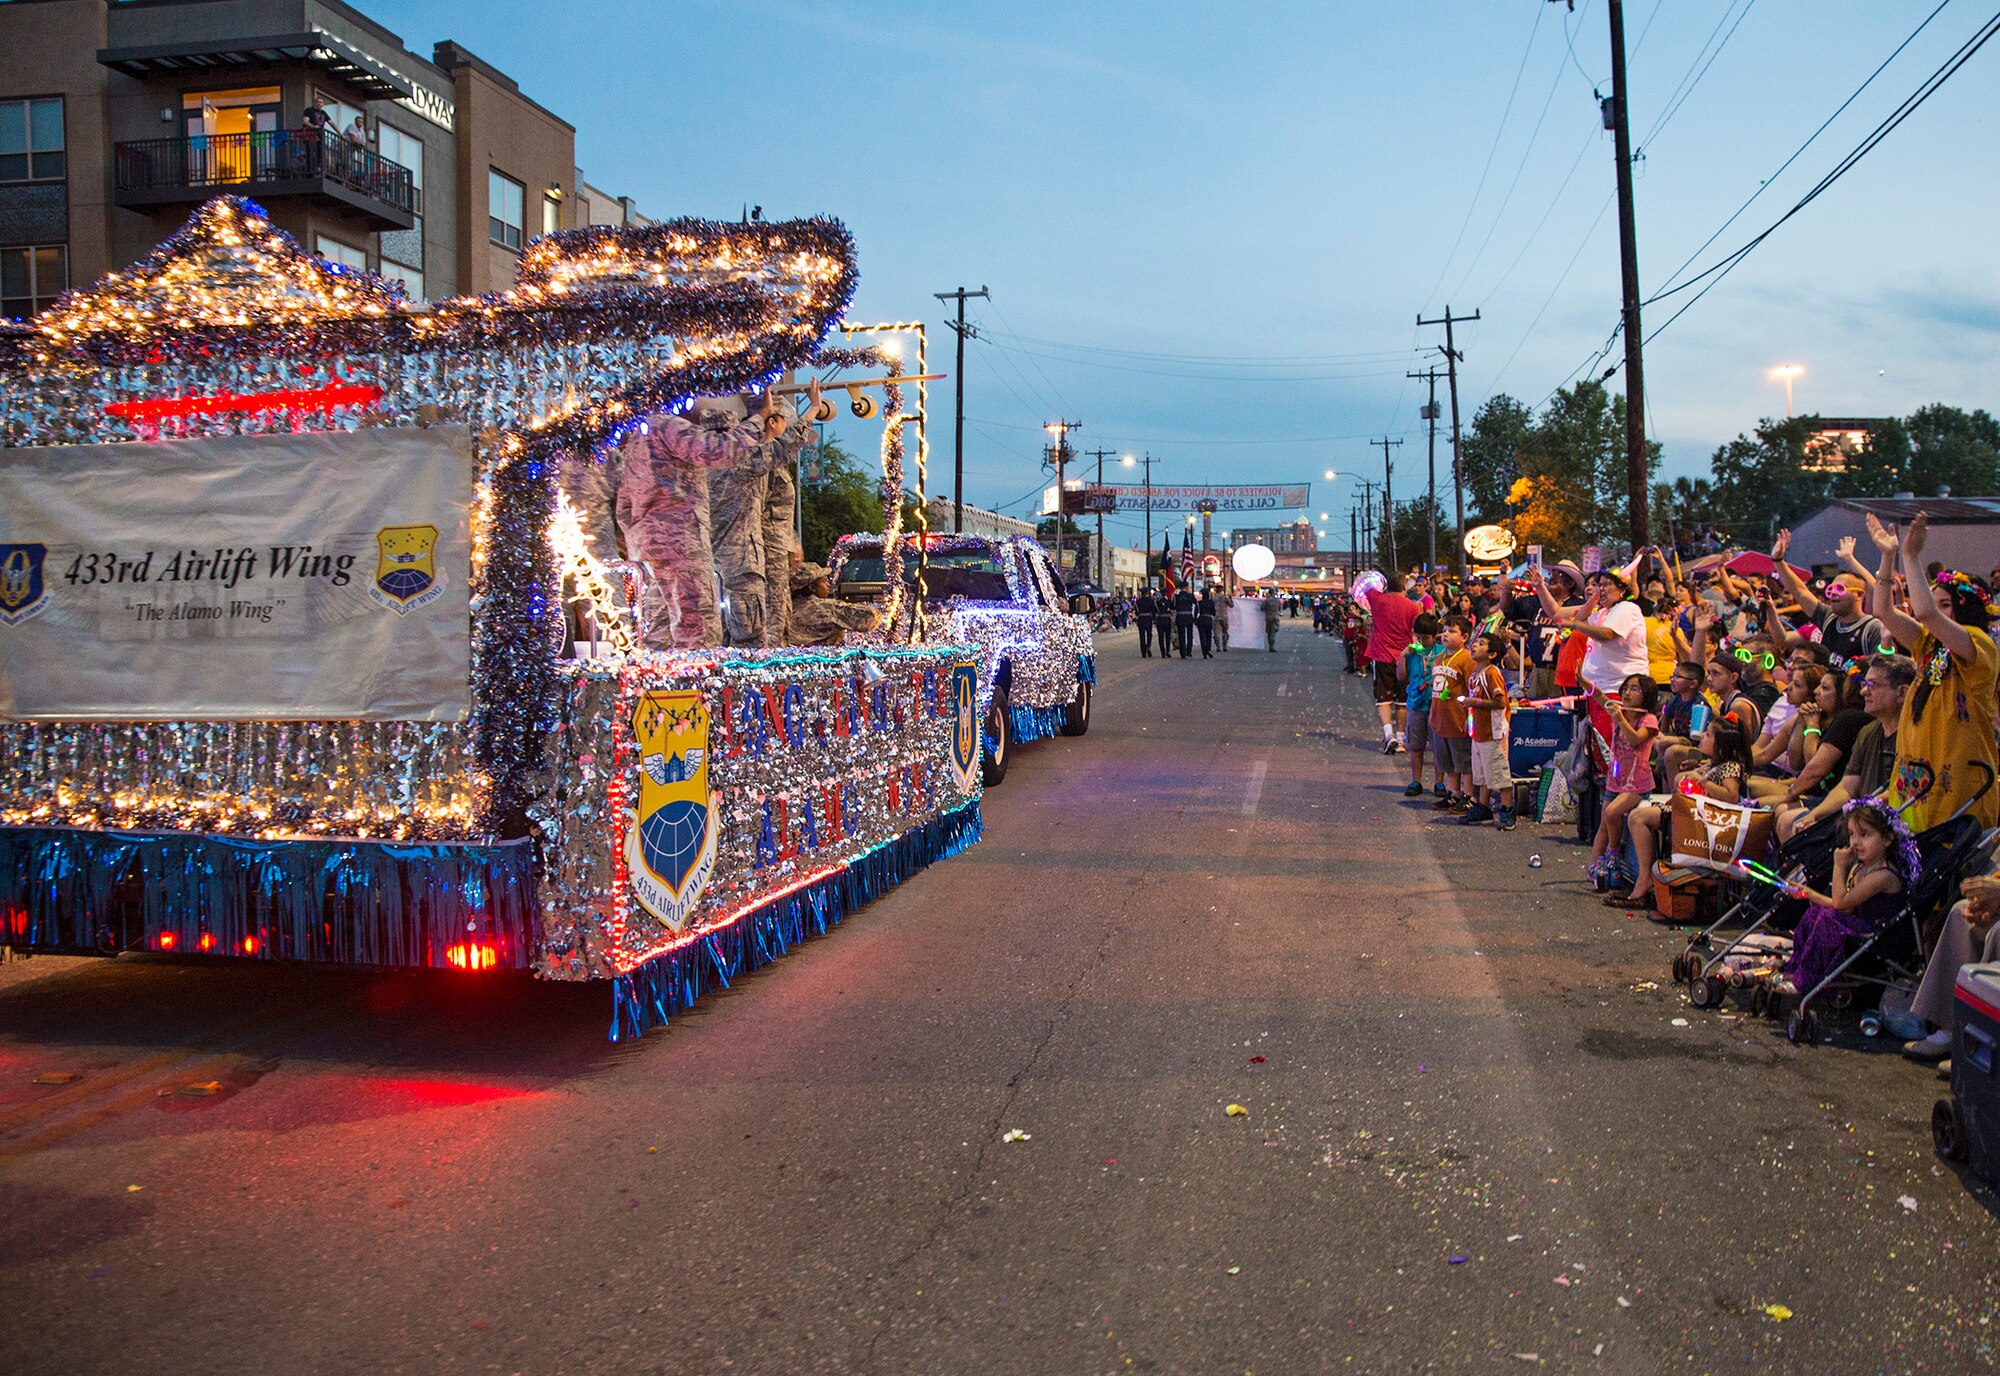 The 433rd Airlift Wing float travels down the Fiesta Flambeau parade route April 23, 2016. The Fiesta Flambeau parade is one of the largest illuminated parades in the world, with over 750,000 spectators and 1.5 million television viewers. (U.S. Air Force photo by Benjamin Faske) (released)